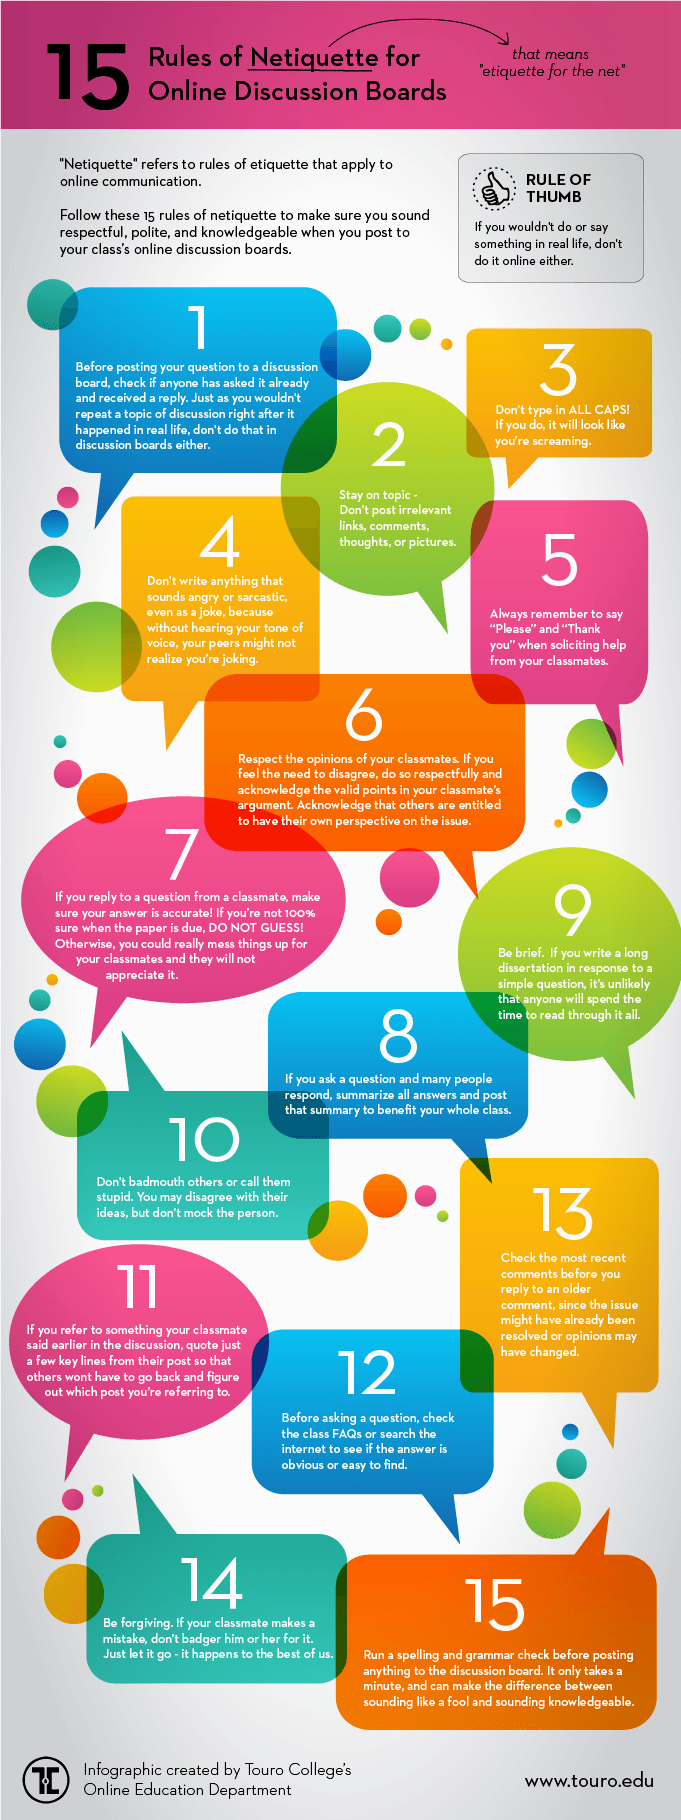 15 Rules of Netiquette for Online Discussion Boards Infographic